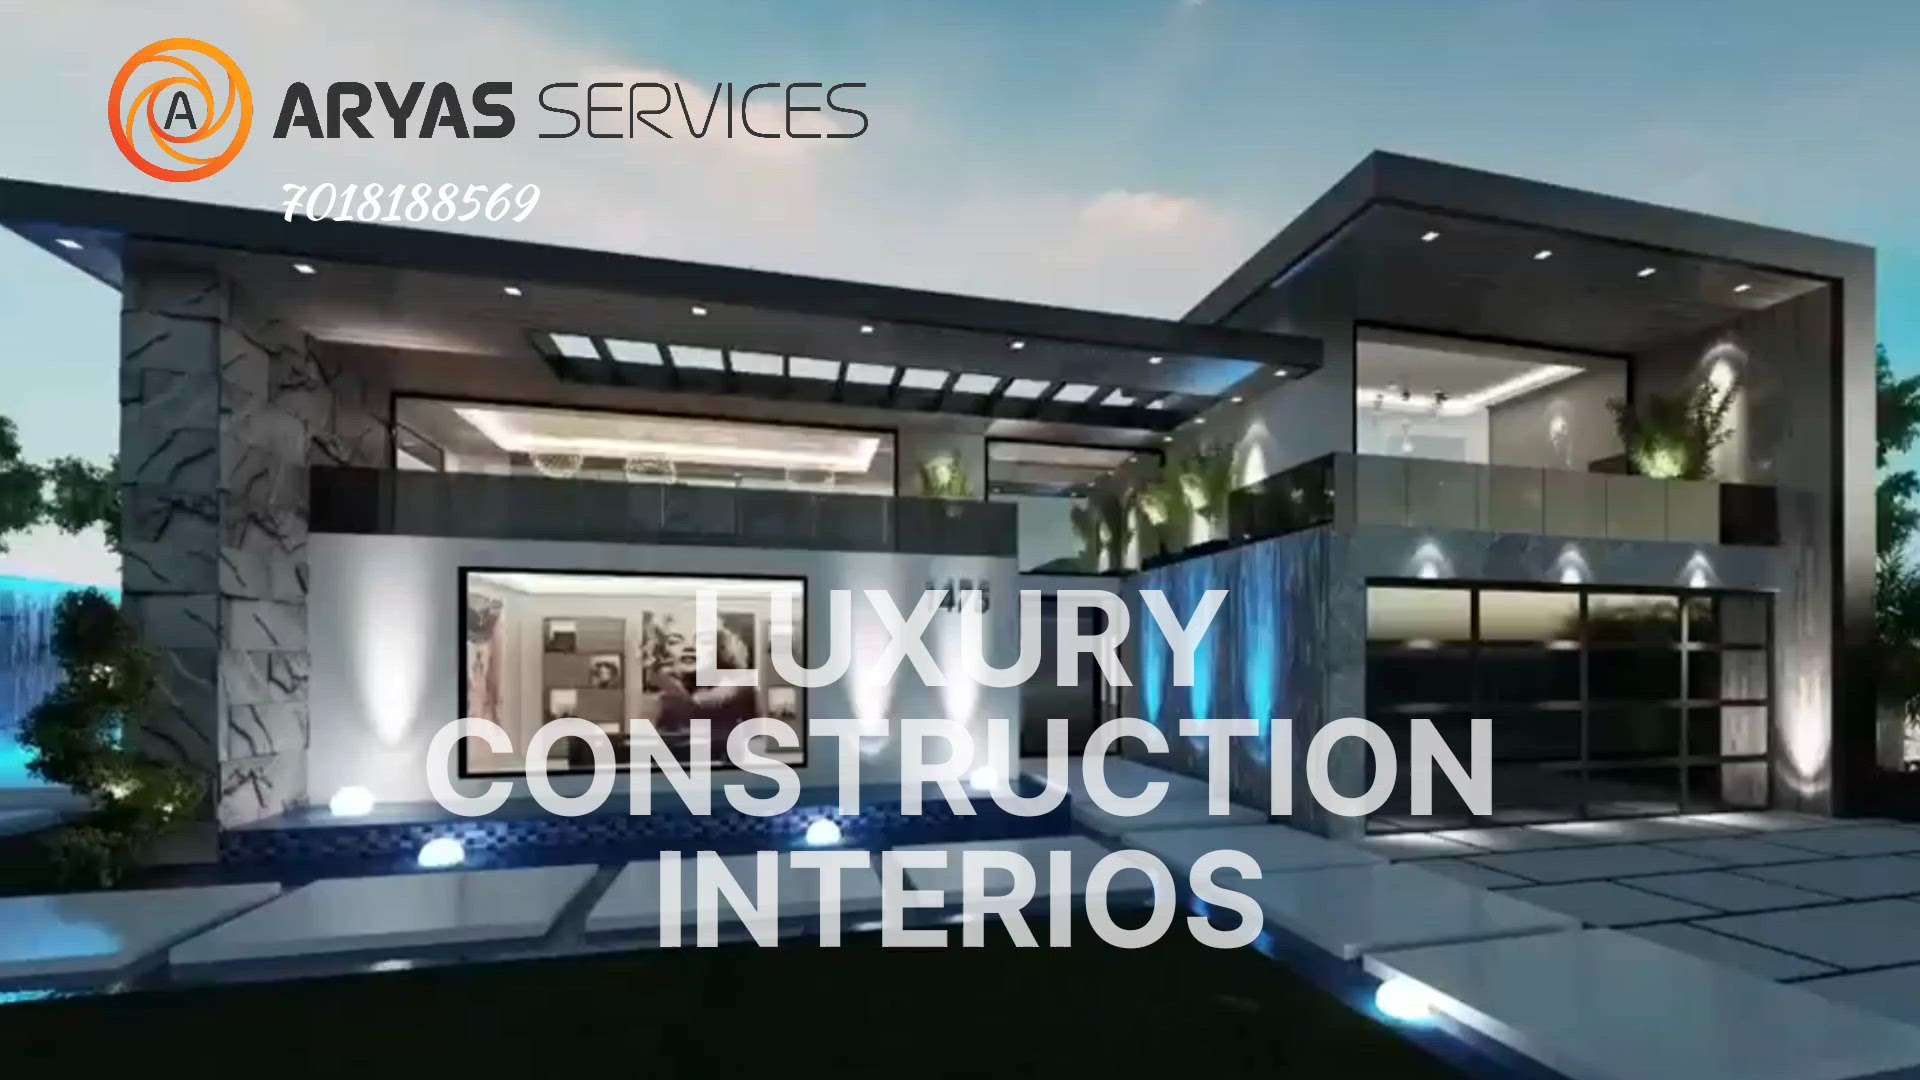 Introducing ARYAS INTERIO & INFRA SERVICES
Elevating Luxury in Your Living Spaces!
Specializing in creating opulent and elegant interior designs.
Meticulous approach with attention to detail.
Diverse range of styles to suit individual preferences.
Careful selection of finest materials, furnishings, and accessories.
Fusion of functionality and beauty for a seamless experience.
Passionate about designing sumptuous bedrooms, inviting living rooms, sophisticated dining areas, and captivating entertainment spaces.
Clear communication, transparency, and exceptional customer service.
Transform your dreams into reality with ARYAS INTERIO & INFRA SERVICES .
Contact us right now for any interior or renovation work, call us @ +91-7018188569 &
Visit our website at www.designinterios.com
Follow us on Instagram #aryasinterio and Facebook @aryasinterio .
#uttarpradesh #construction_himachal
#noidainterior #noida #delhincr #delhi #Delhihome  #noidaconstruction #interiordesign #interior #interiors #int